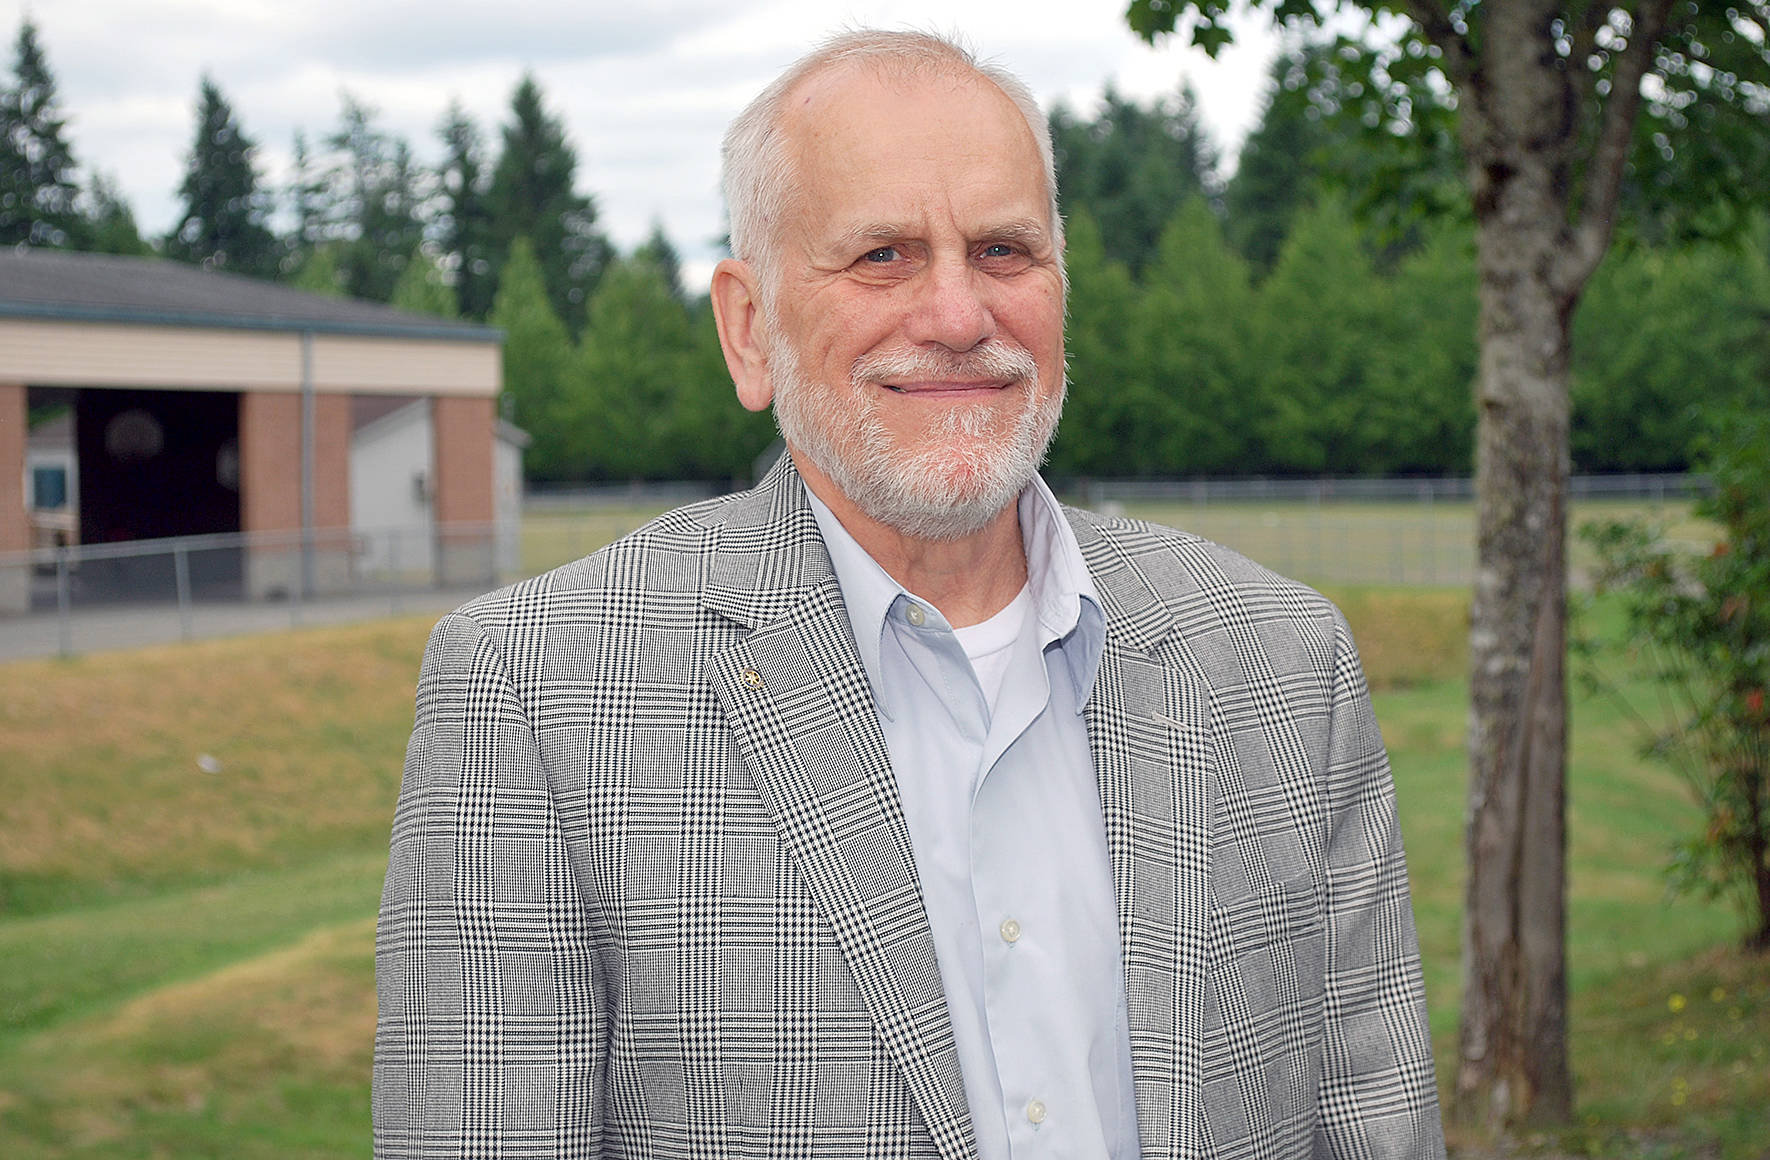 Mike “Papa Bear” Maryanski will serve at the interim superintendent for the Tahoma School District for the rest of the 2019-20 year, coming out of a recent retirement. Photo courtesy of the Tahoma School District.